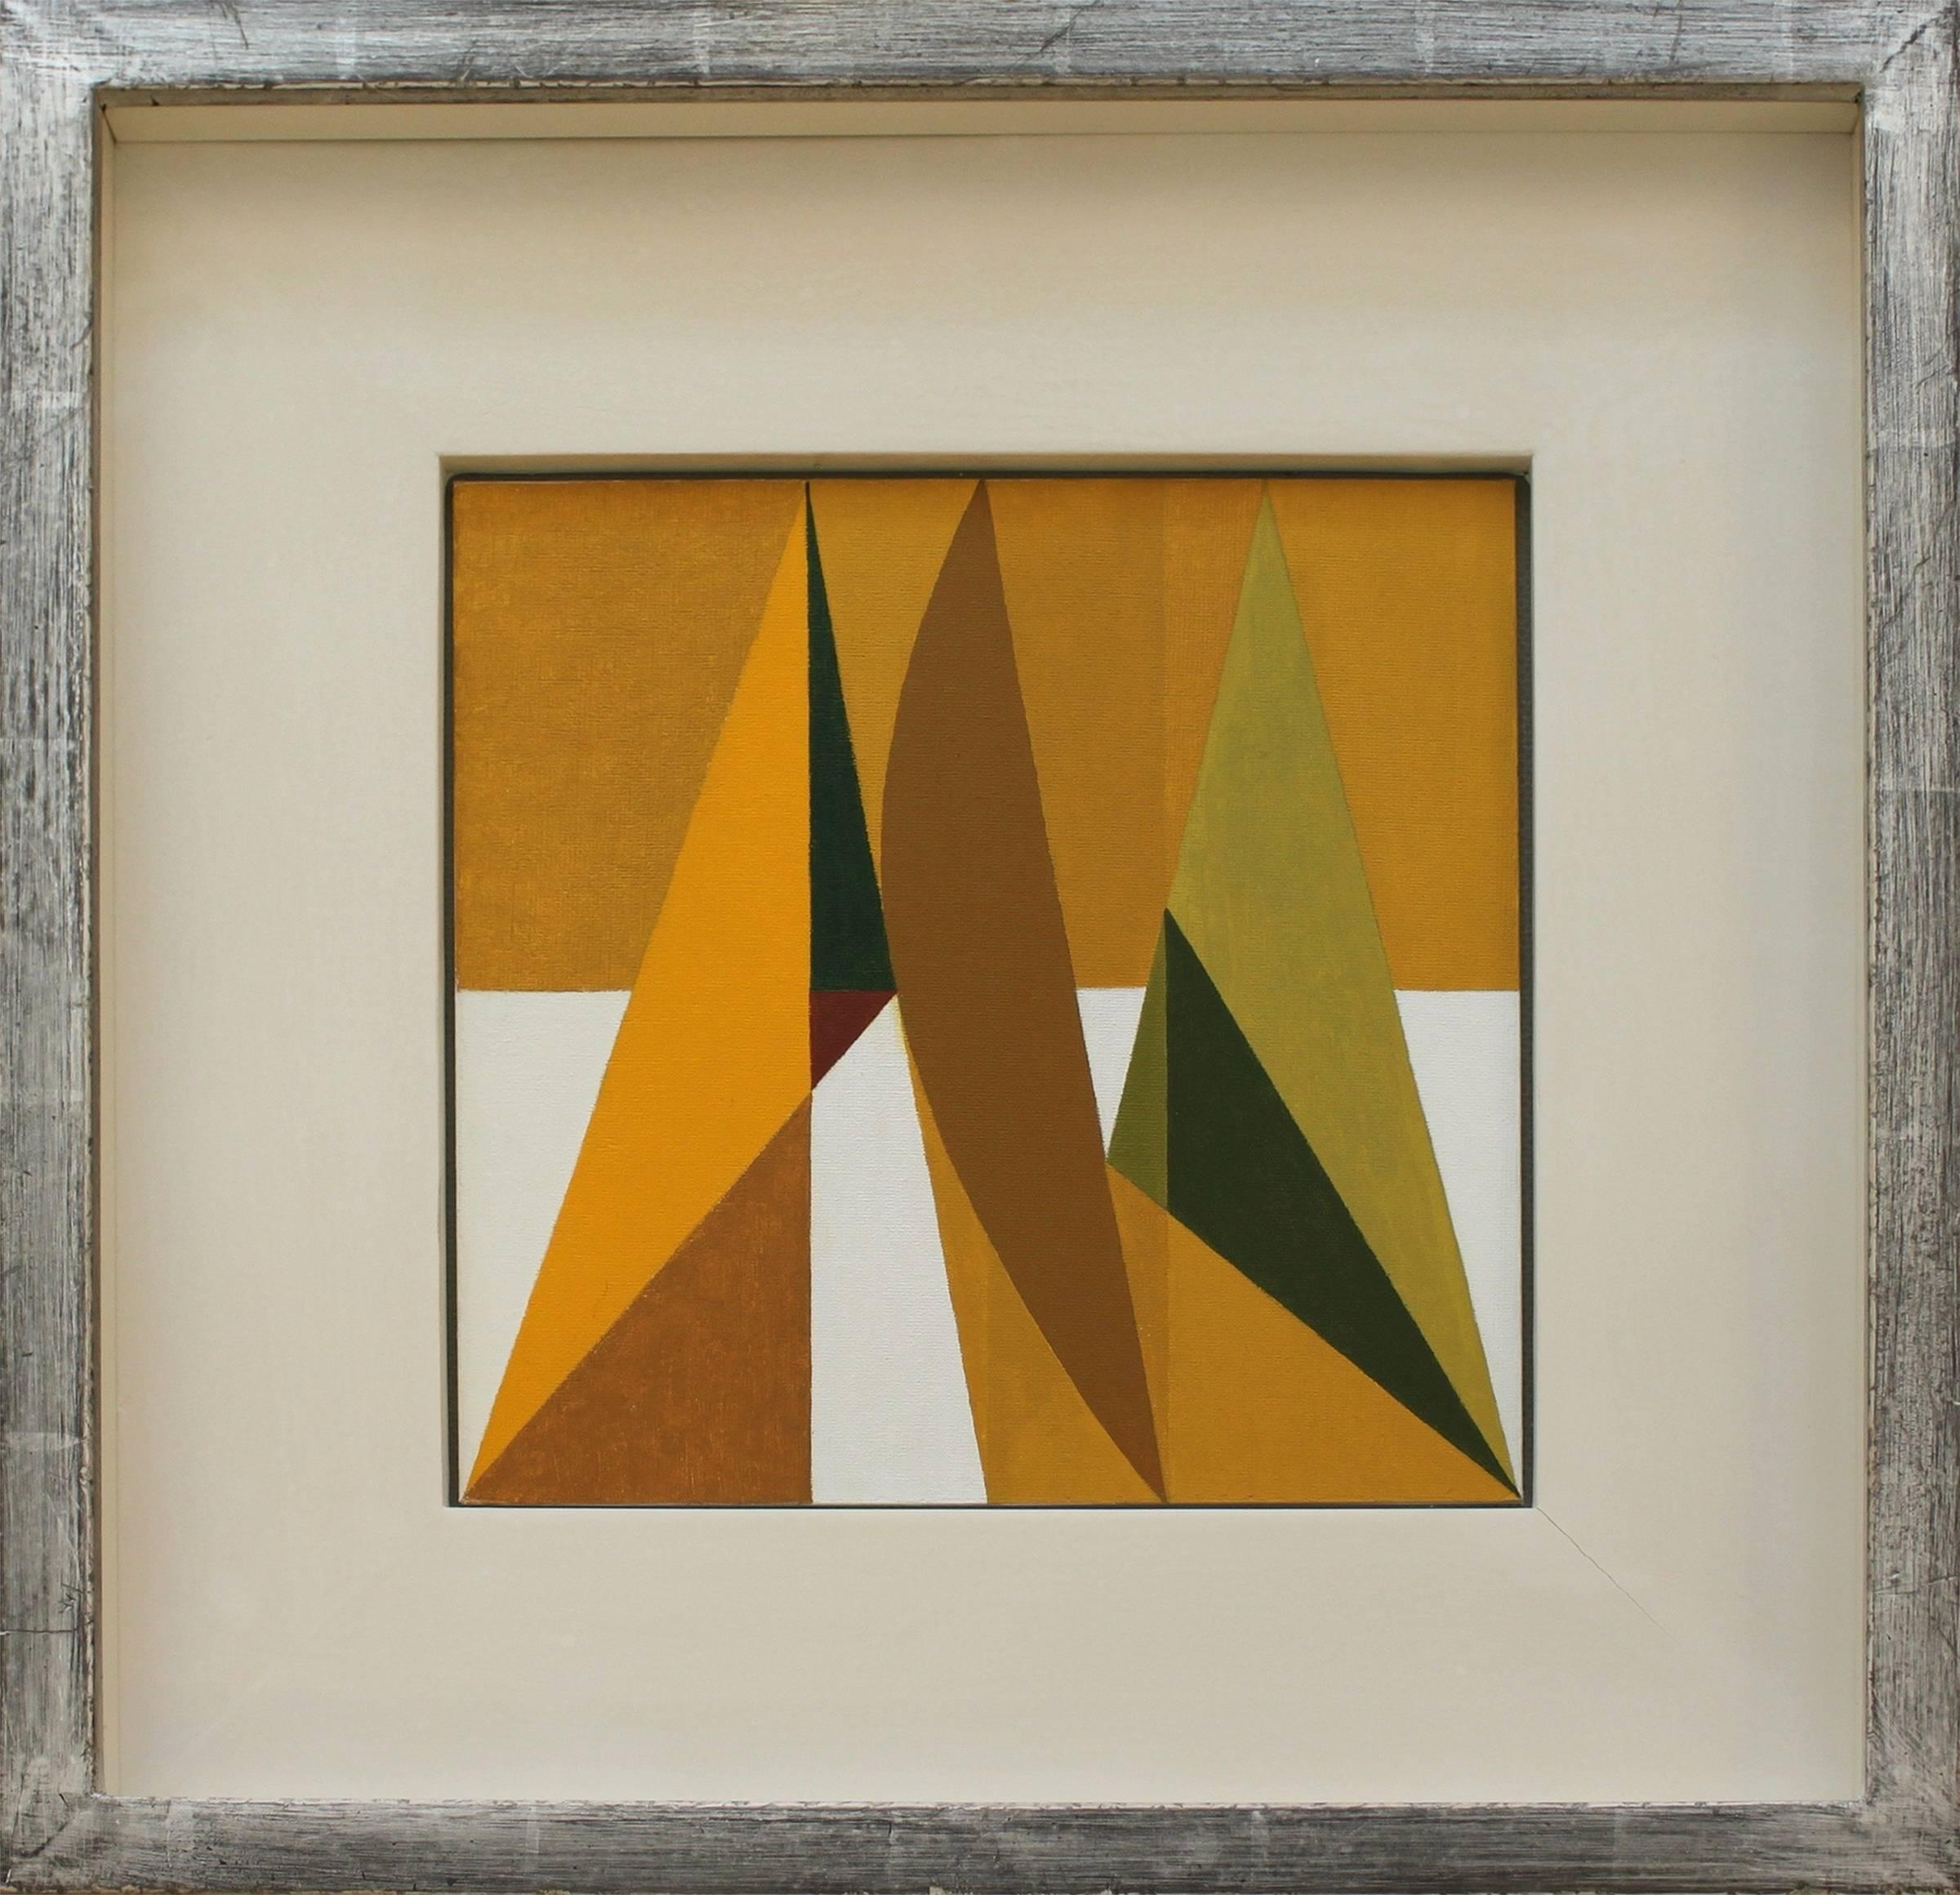 Artist: George Dannatt (1915-2009).
Title: Three figure composition Version 2.
Medium: Oil on board.
Signed, dated on verso. 
Date: circa 1973-1974

Illustrated in: St Ives revisited, by Peter Davies, 1994 (pp 143).
Exhibited: Newlyn Gallery,